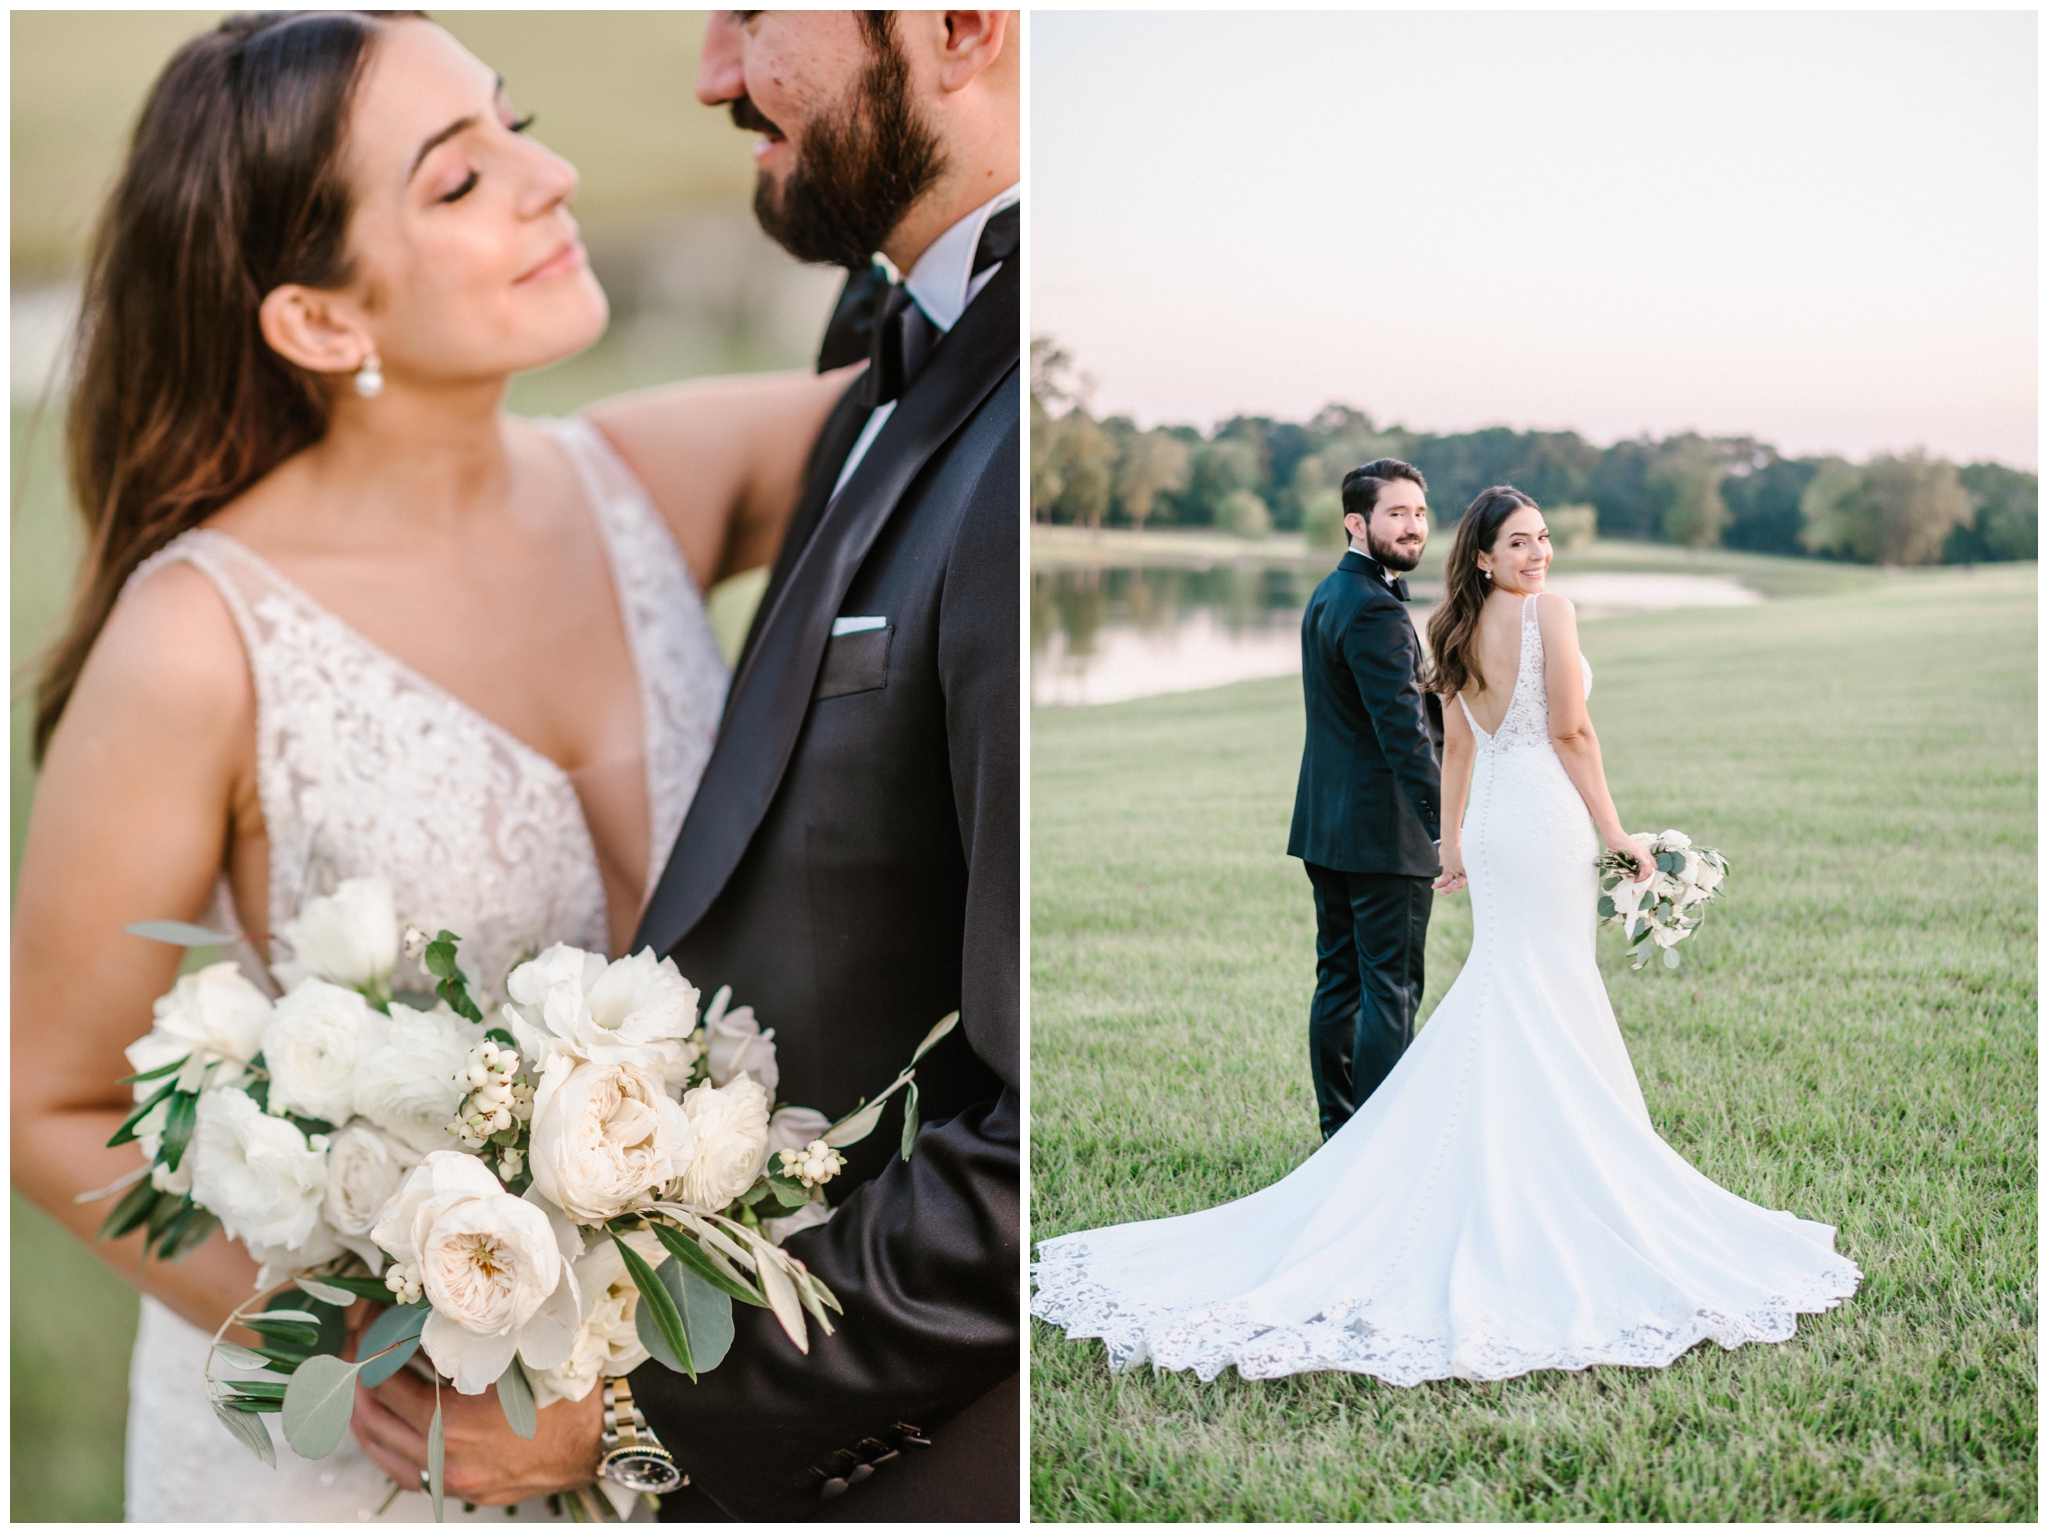 Fall wedding reception at The Farmhouse in Montgomery, Texas | Joslyn Holtfort Photography